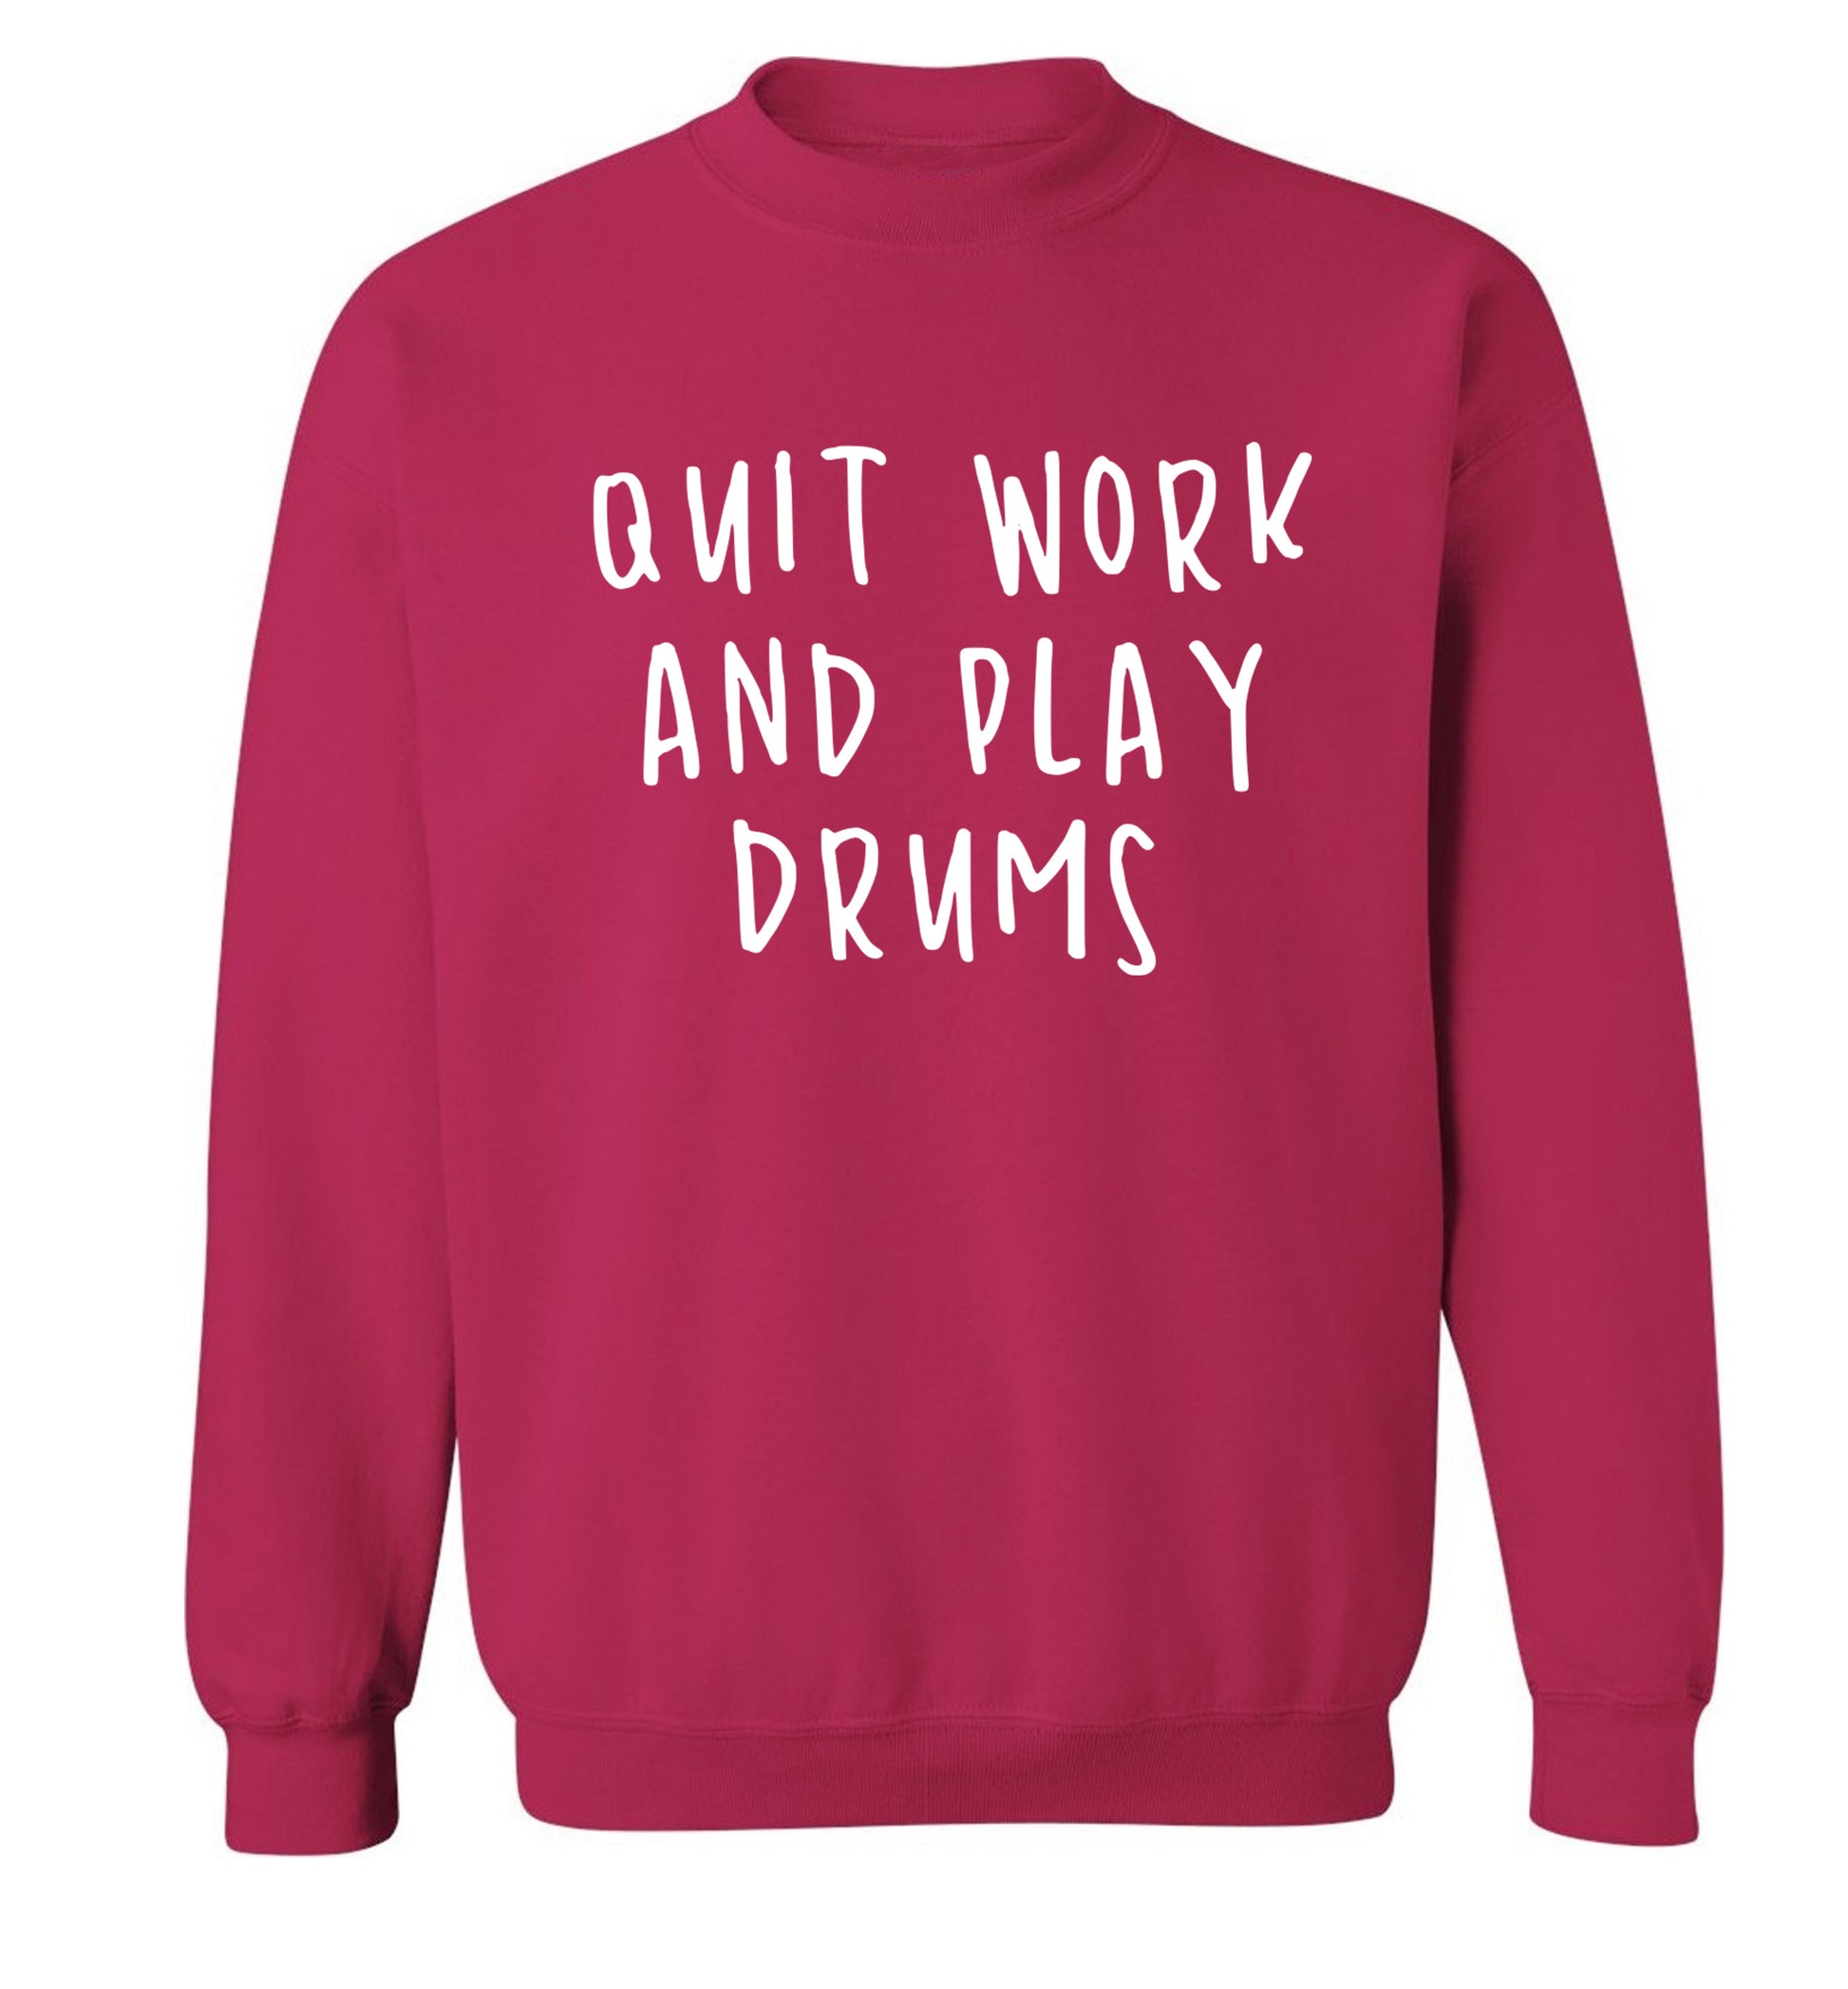 Quit work and play drums Adult's unisex pink Sweater 2XL